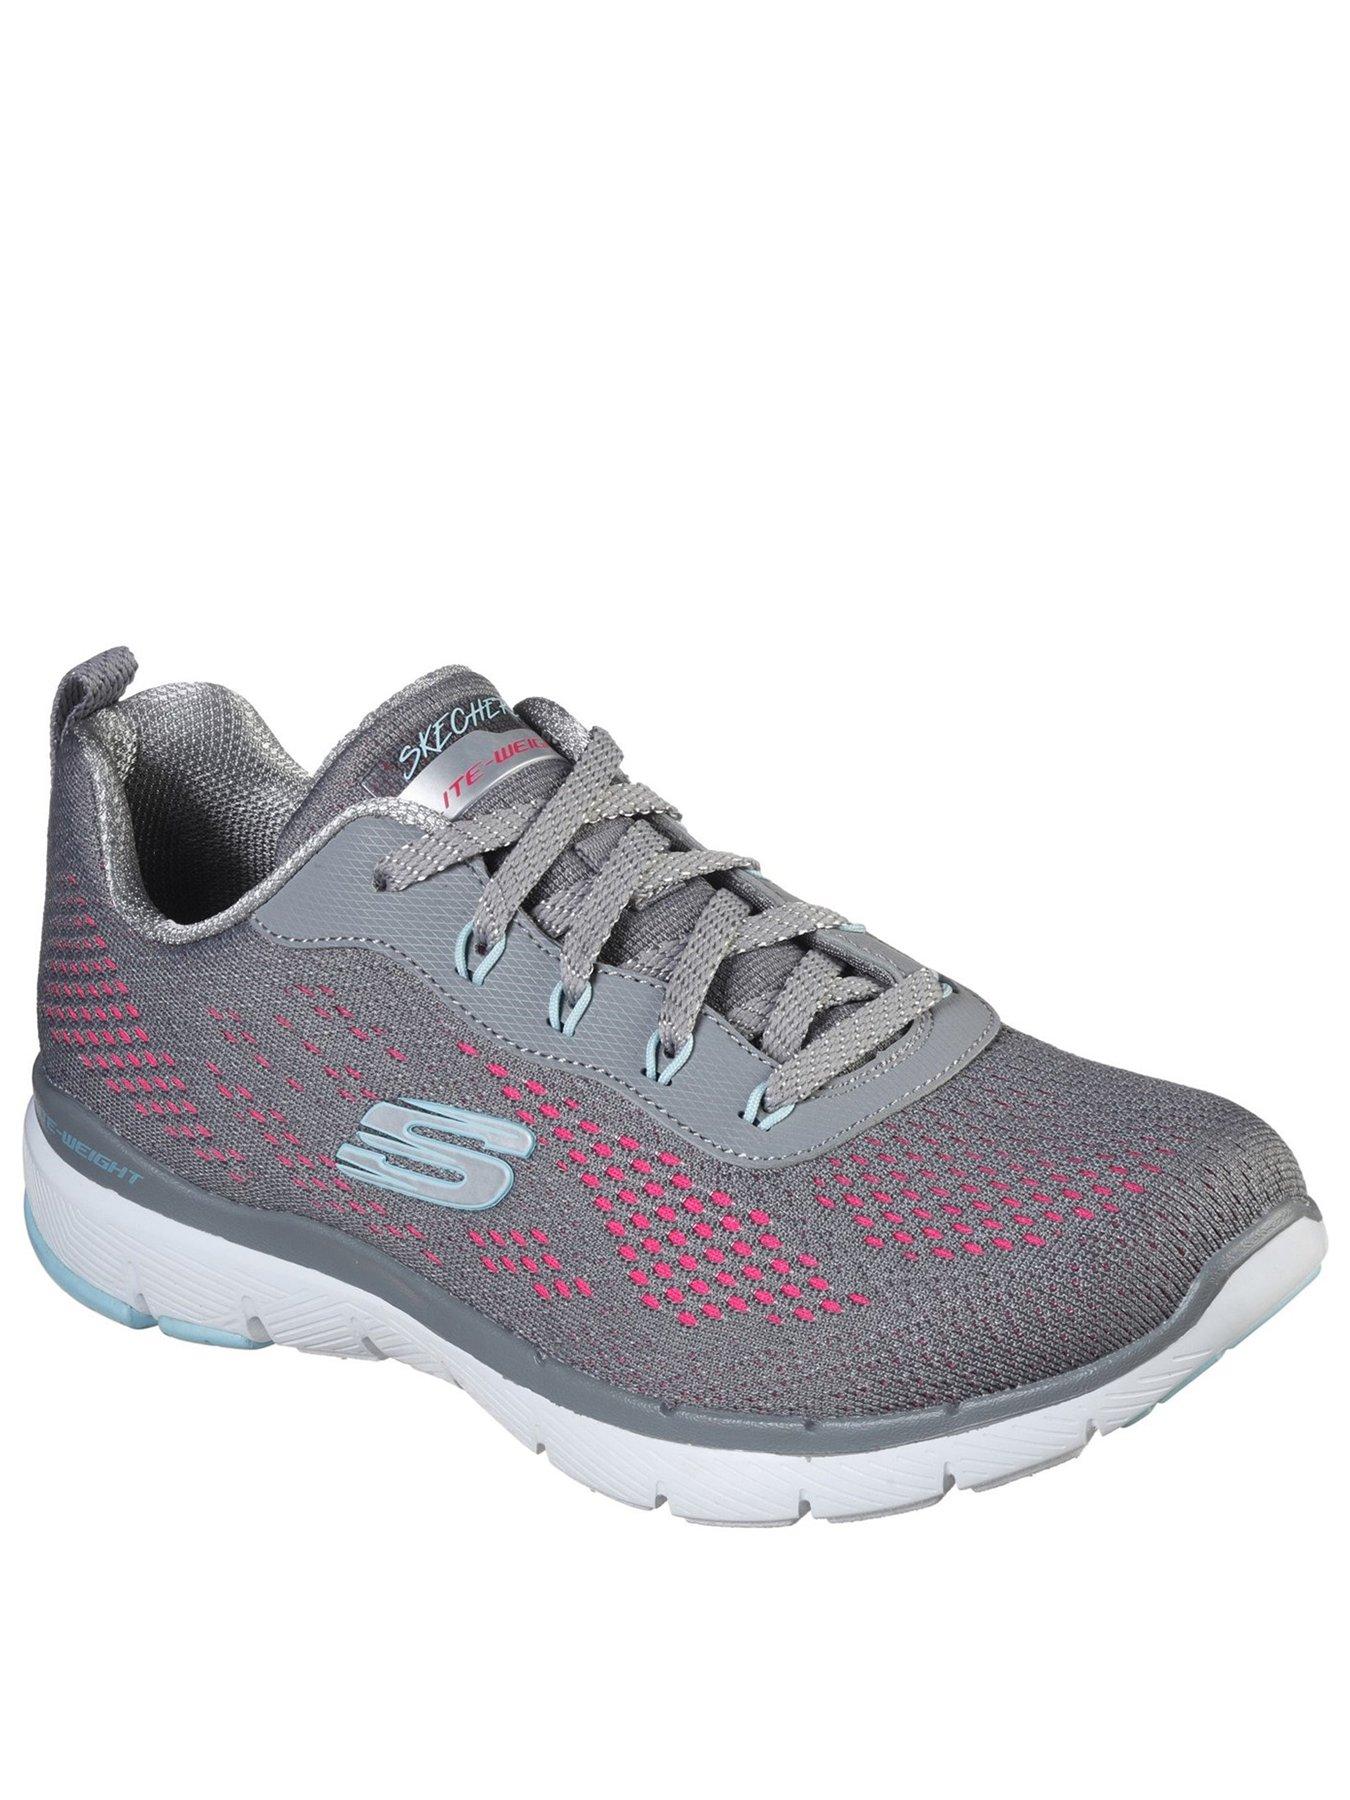 skechers trainers womens size 7